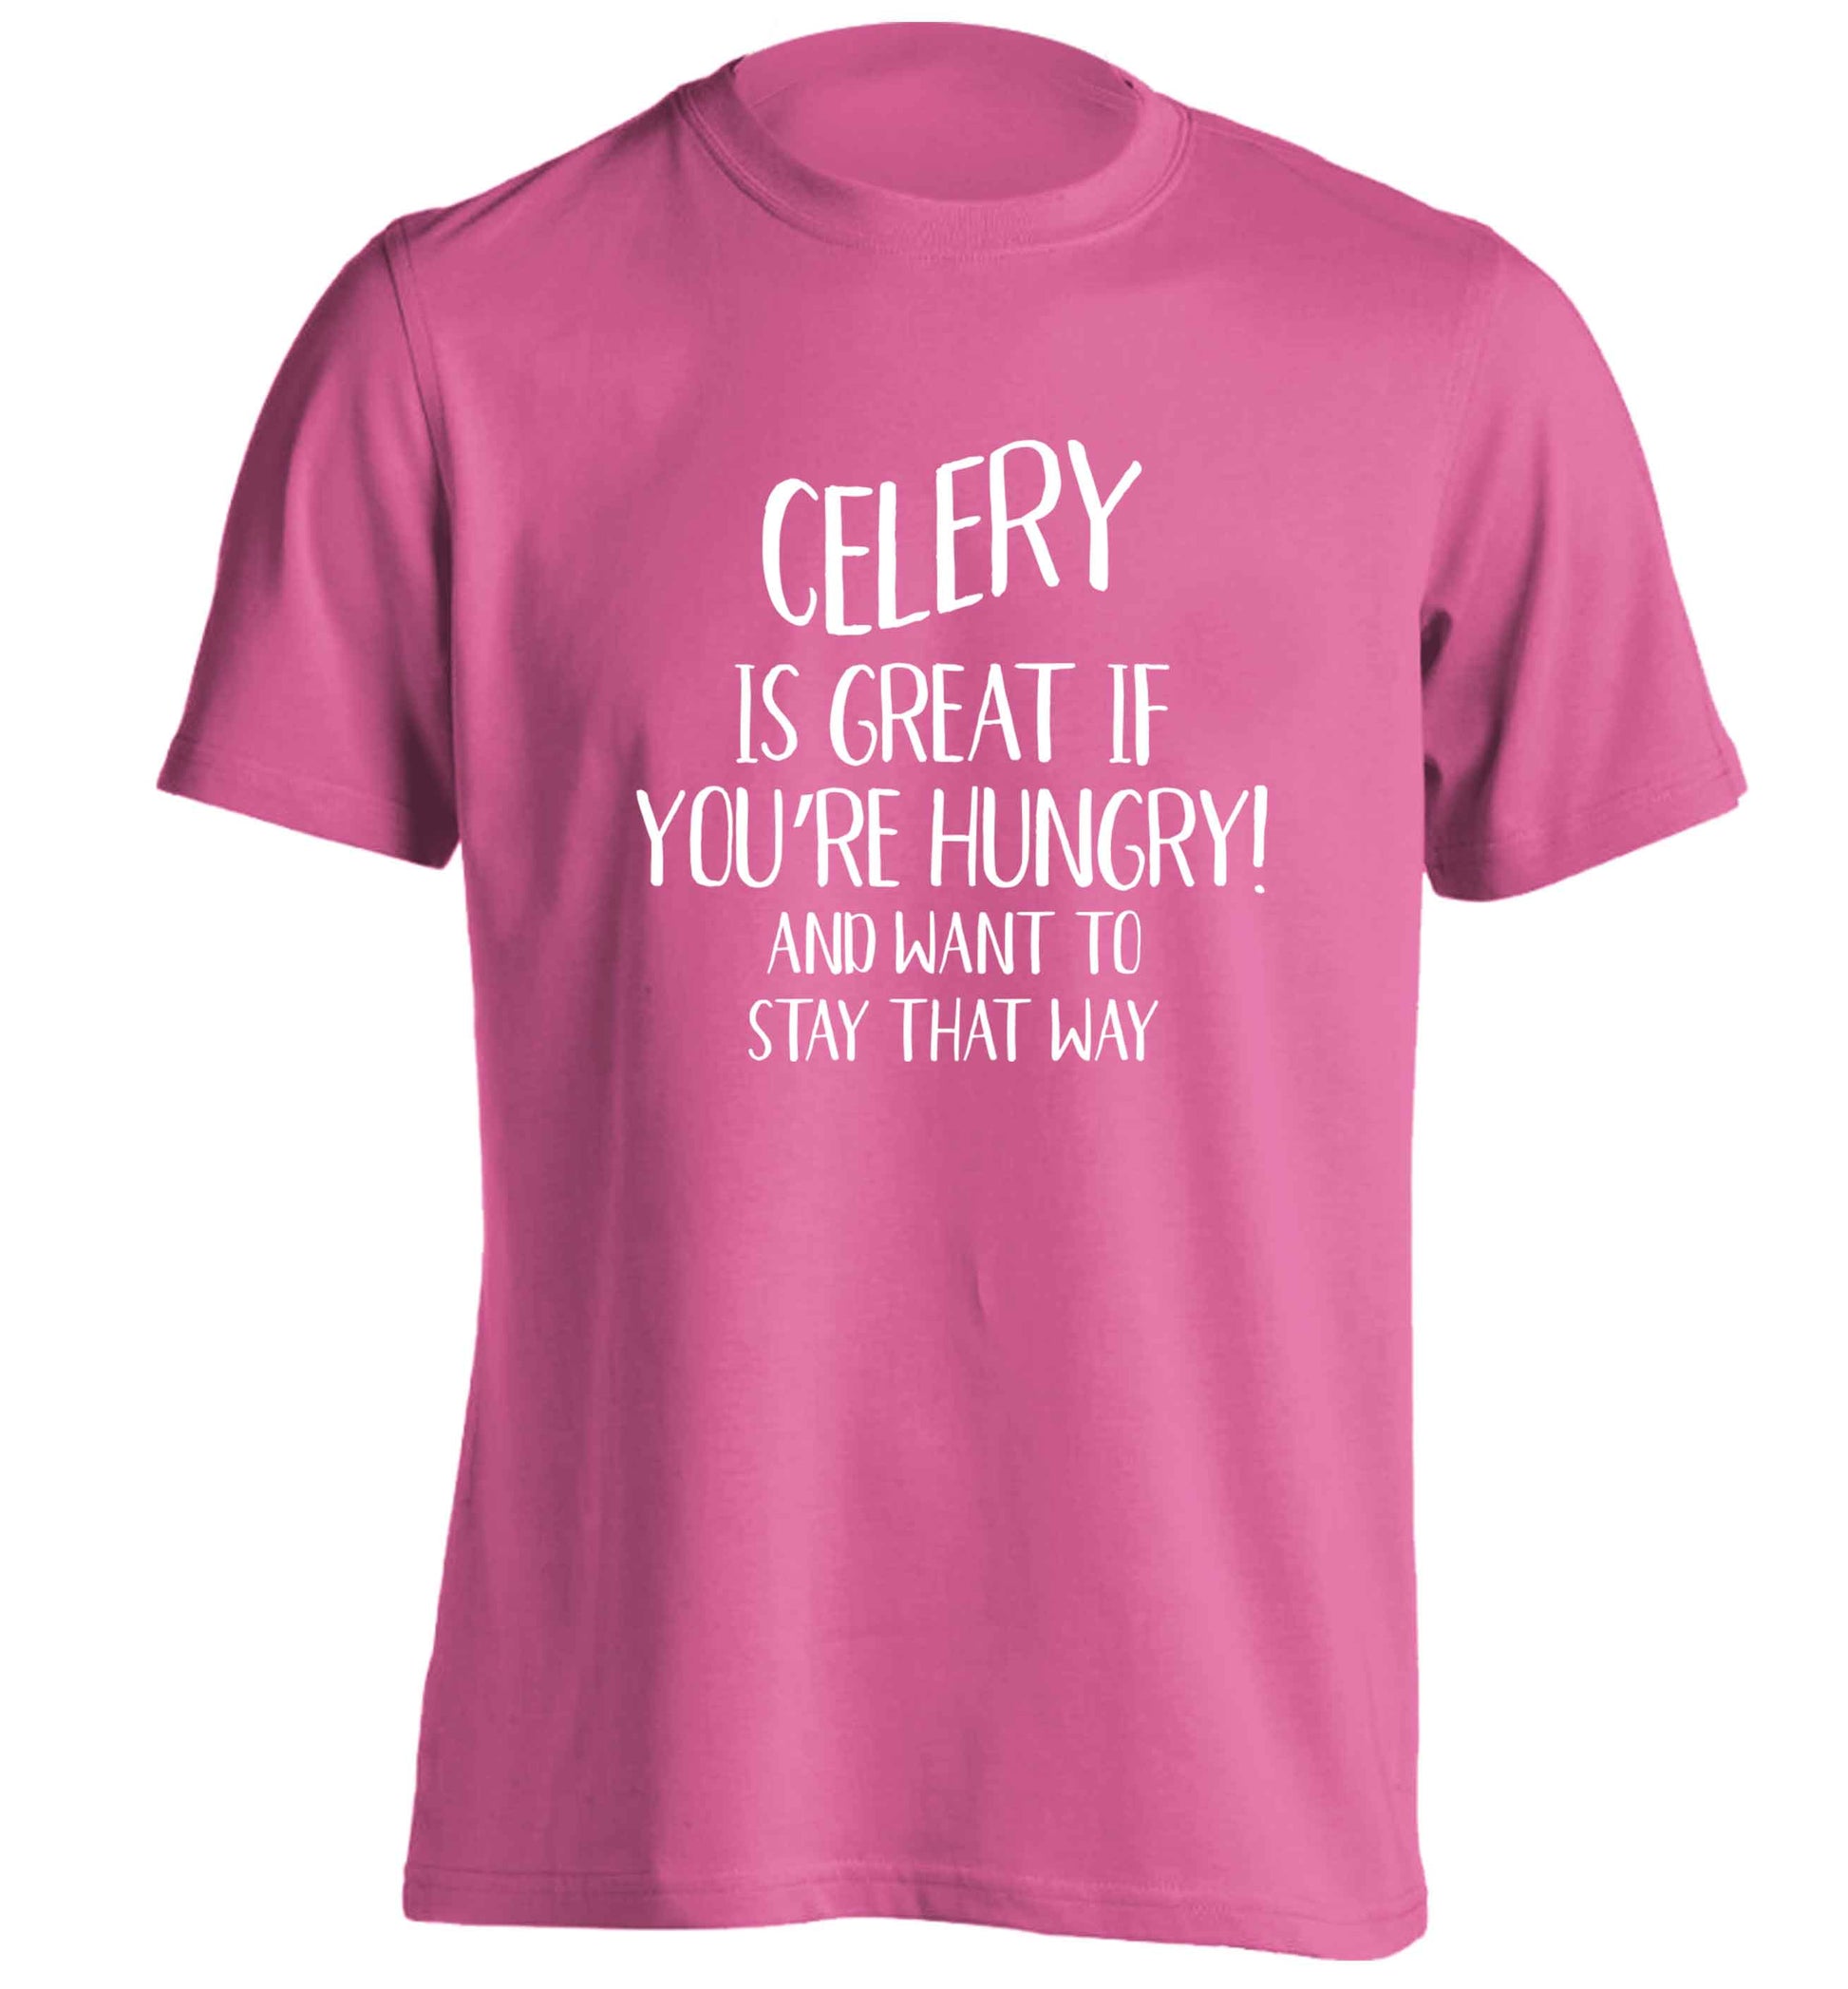 Cellery is great when you're hungry and want to stay that way adults unisex pink Tshirt 2XL